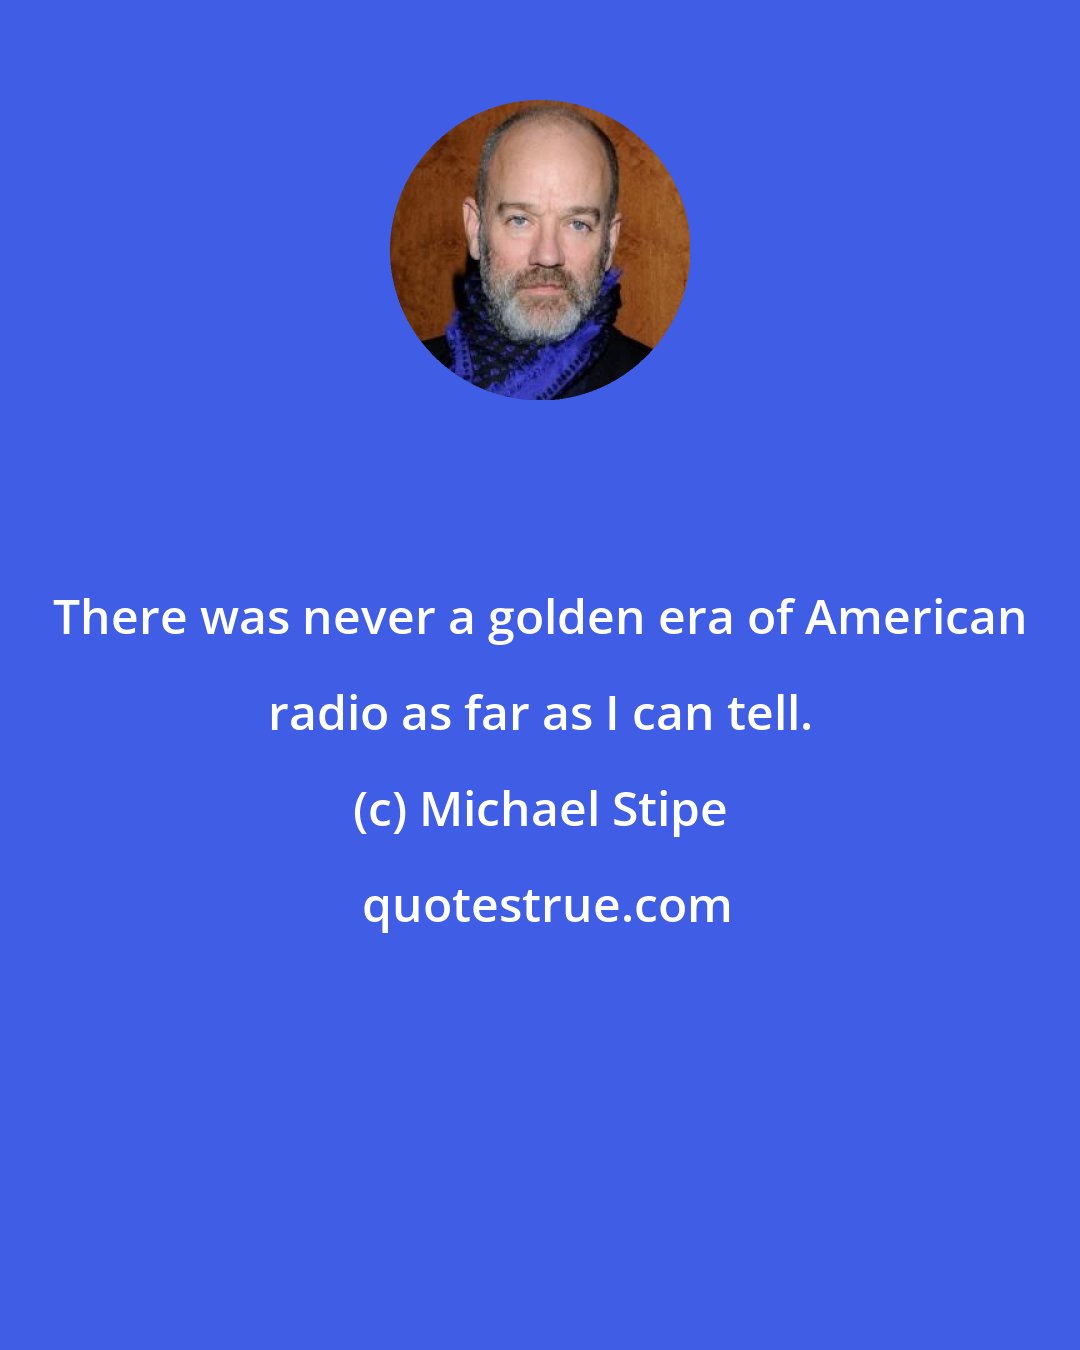 Michael Stipe: There was never a golden era of American radio as far as I can tell.